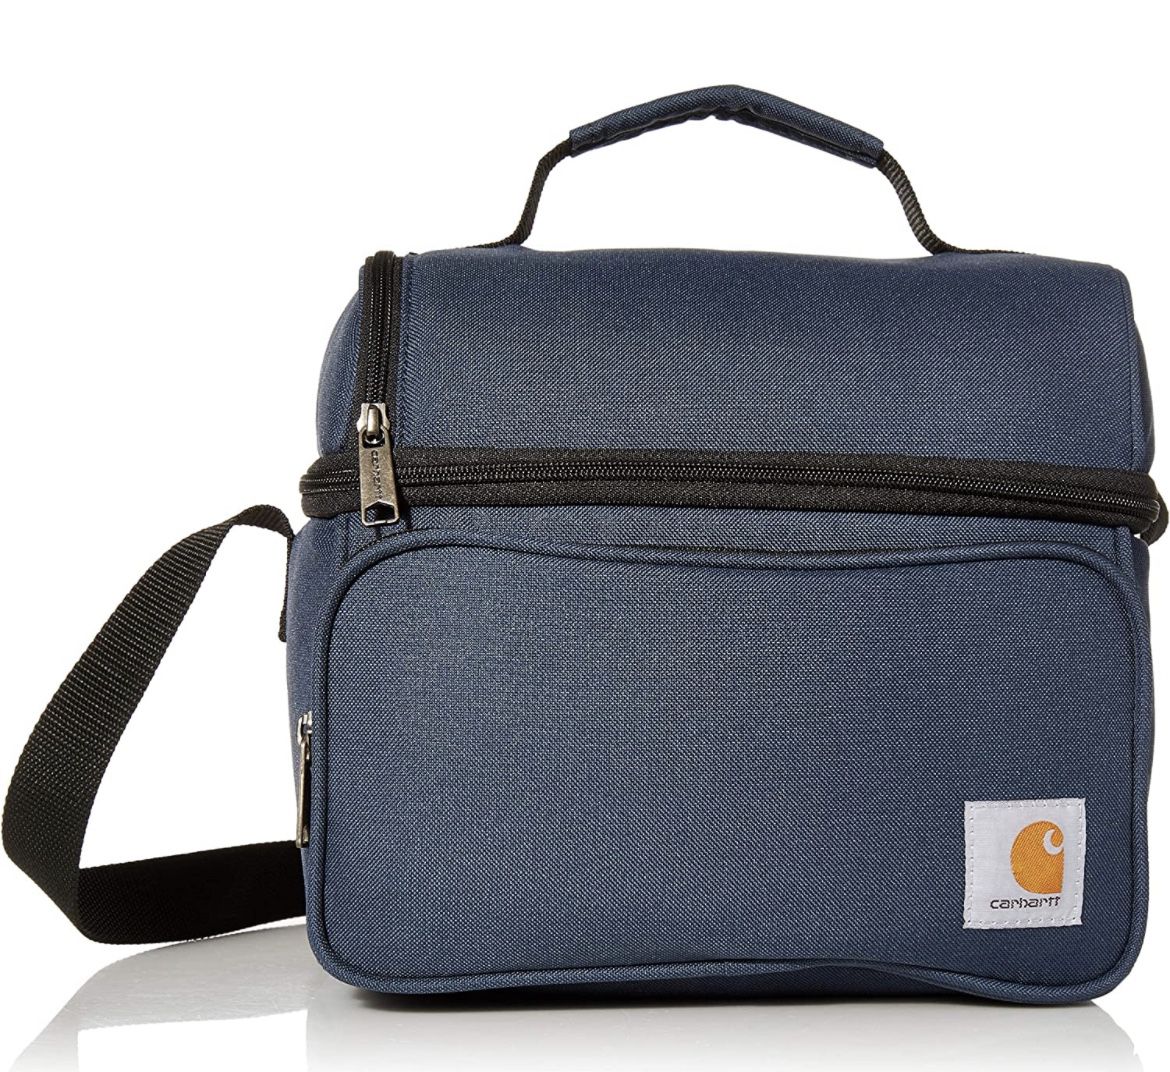 Carhartt Insulated 12 Can Two Compartment Lunch Cooler, Durable Fully-Insulated Lunch Box, Navy. New With Tags 